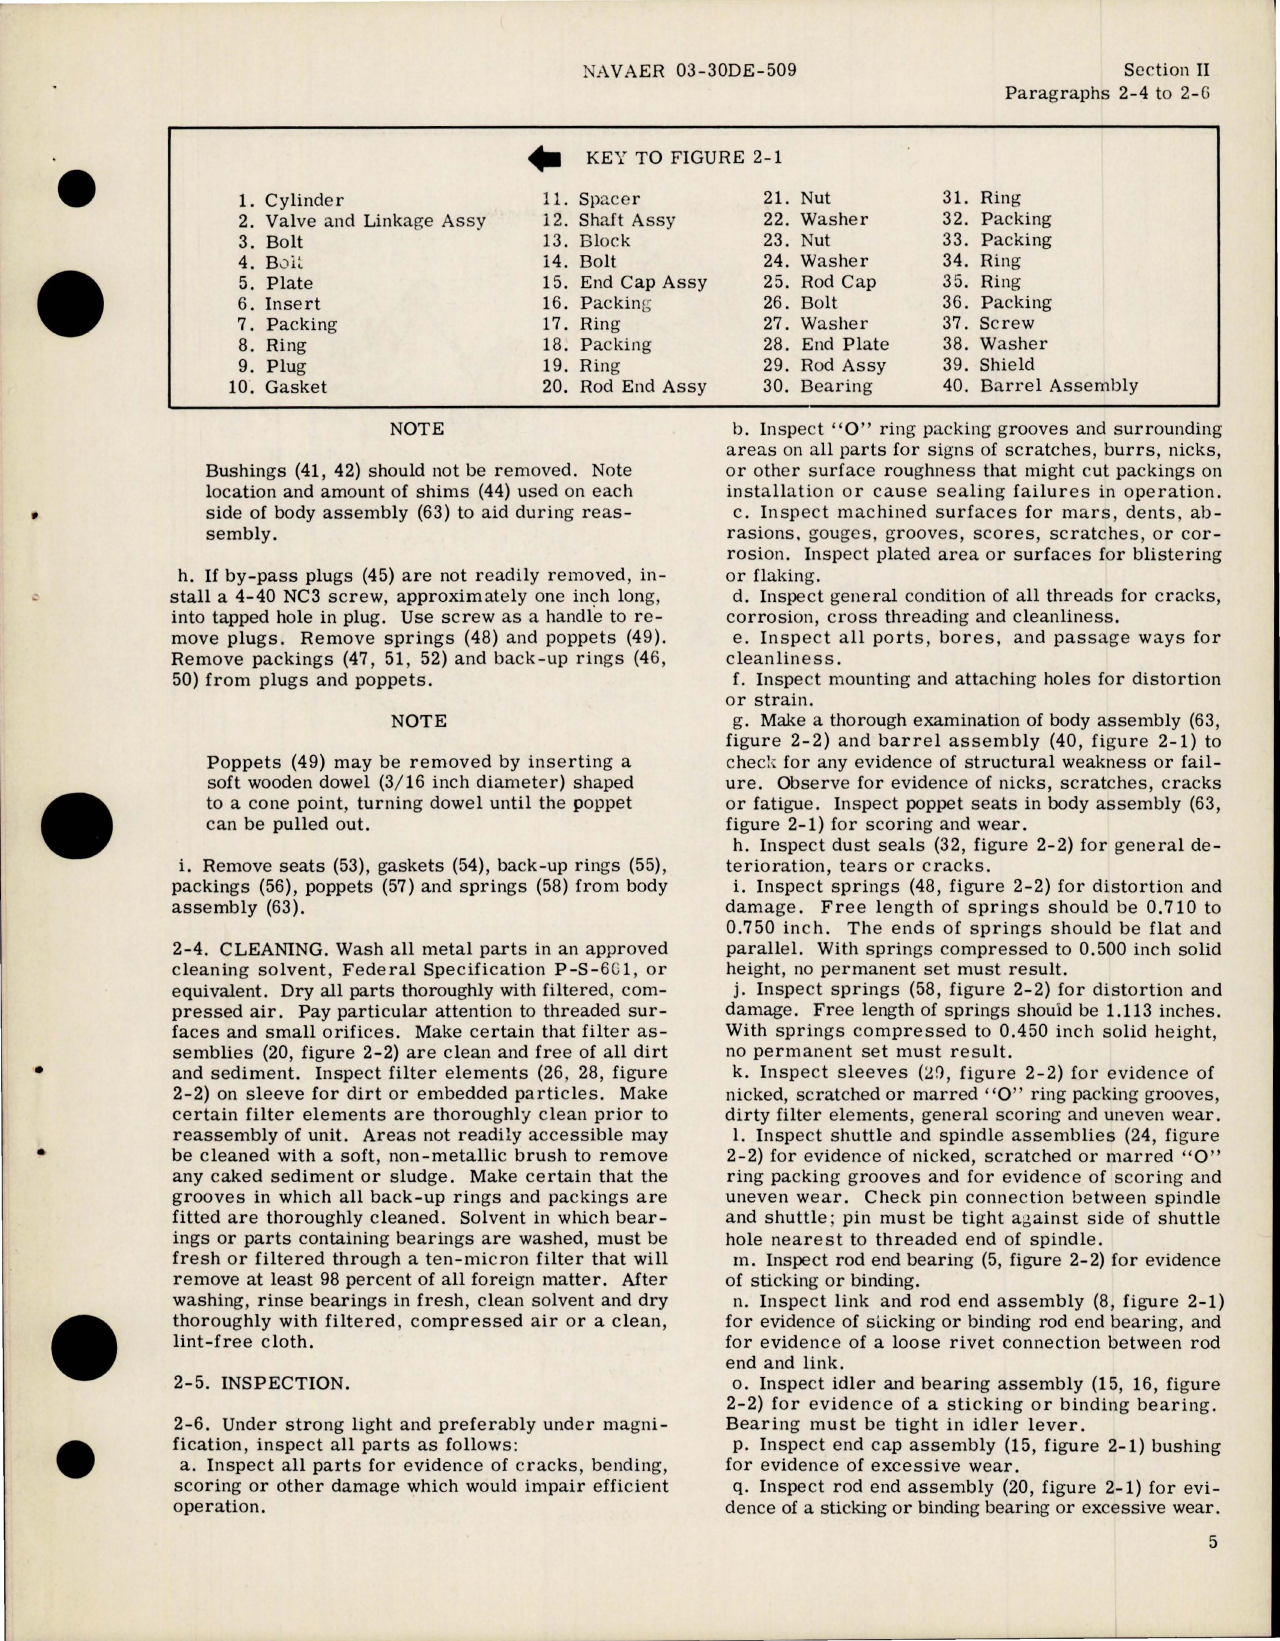 Sample page 7 from AirCorps Library document: Overhaul Instructions for Stabilizer Control Power Cylinders - Parts 12020-2 and 12490-1 